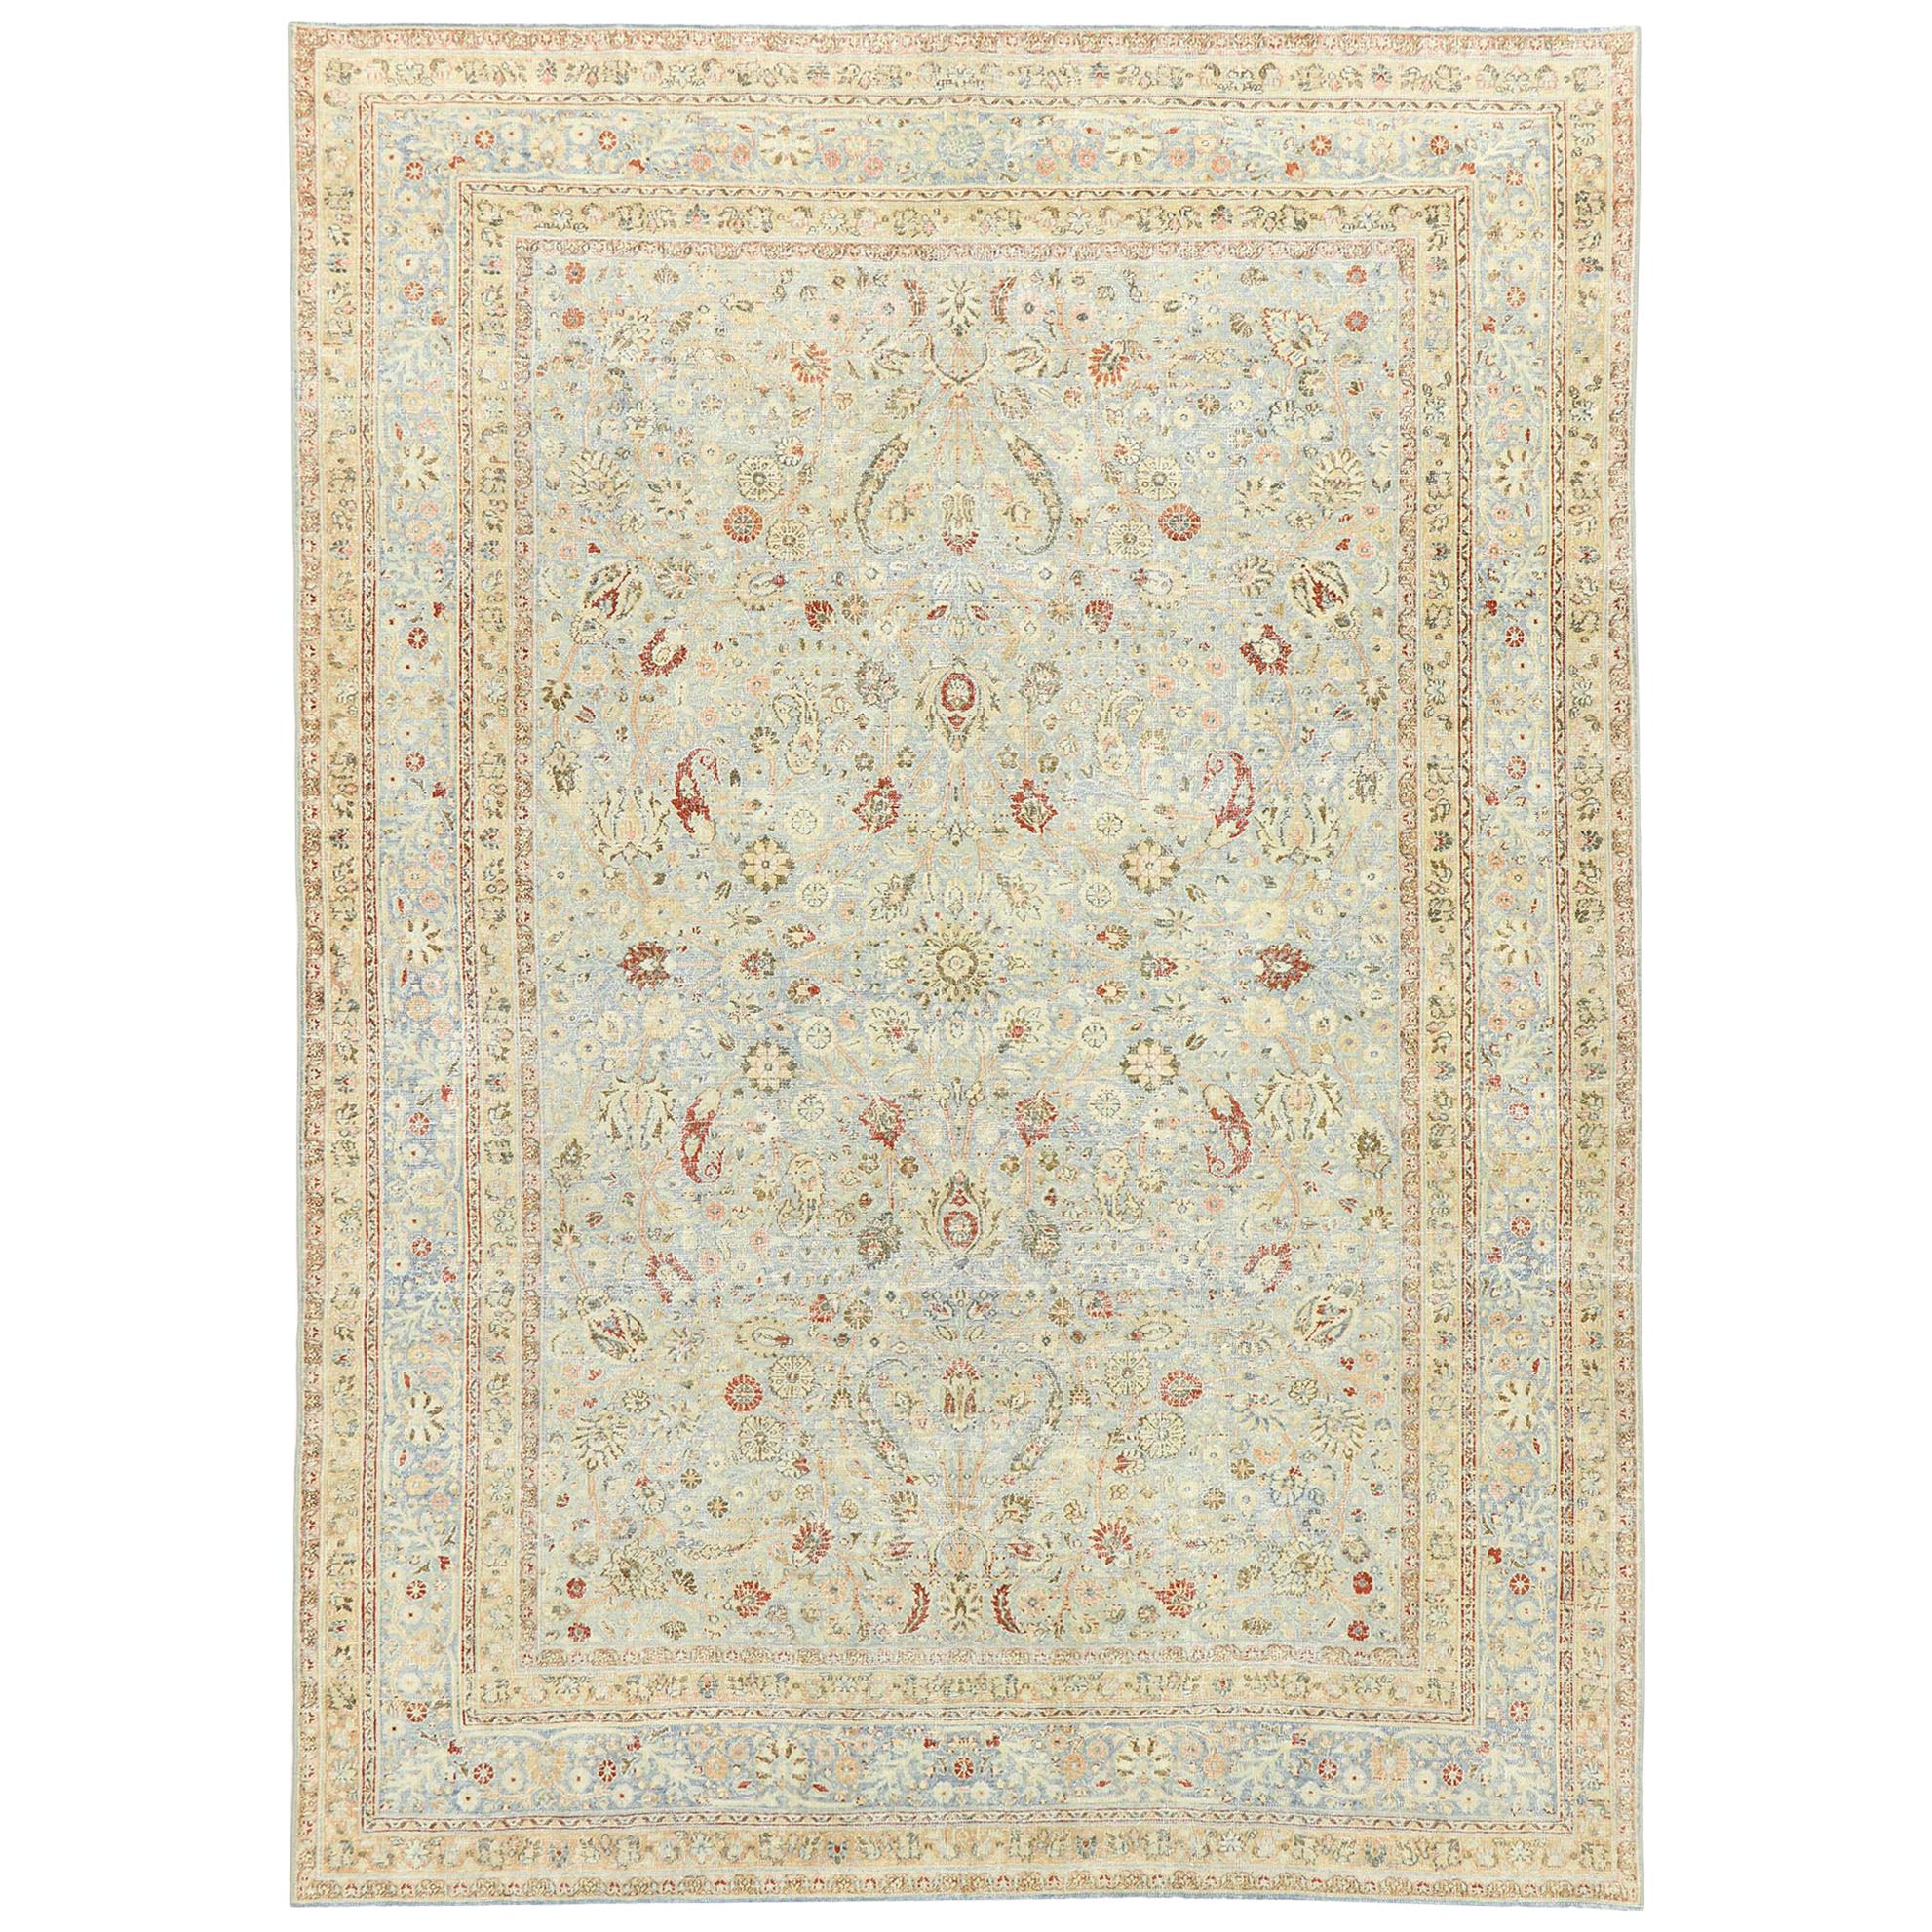 Distressed Antique Persian Khorassan Rug with Rustic English Manor Style For Sale